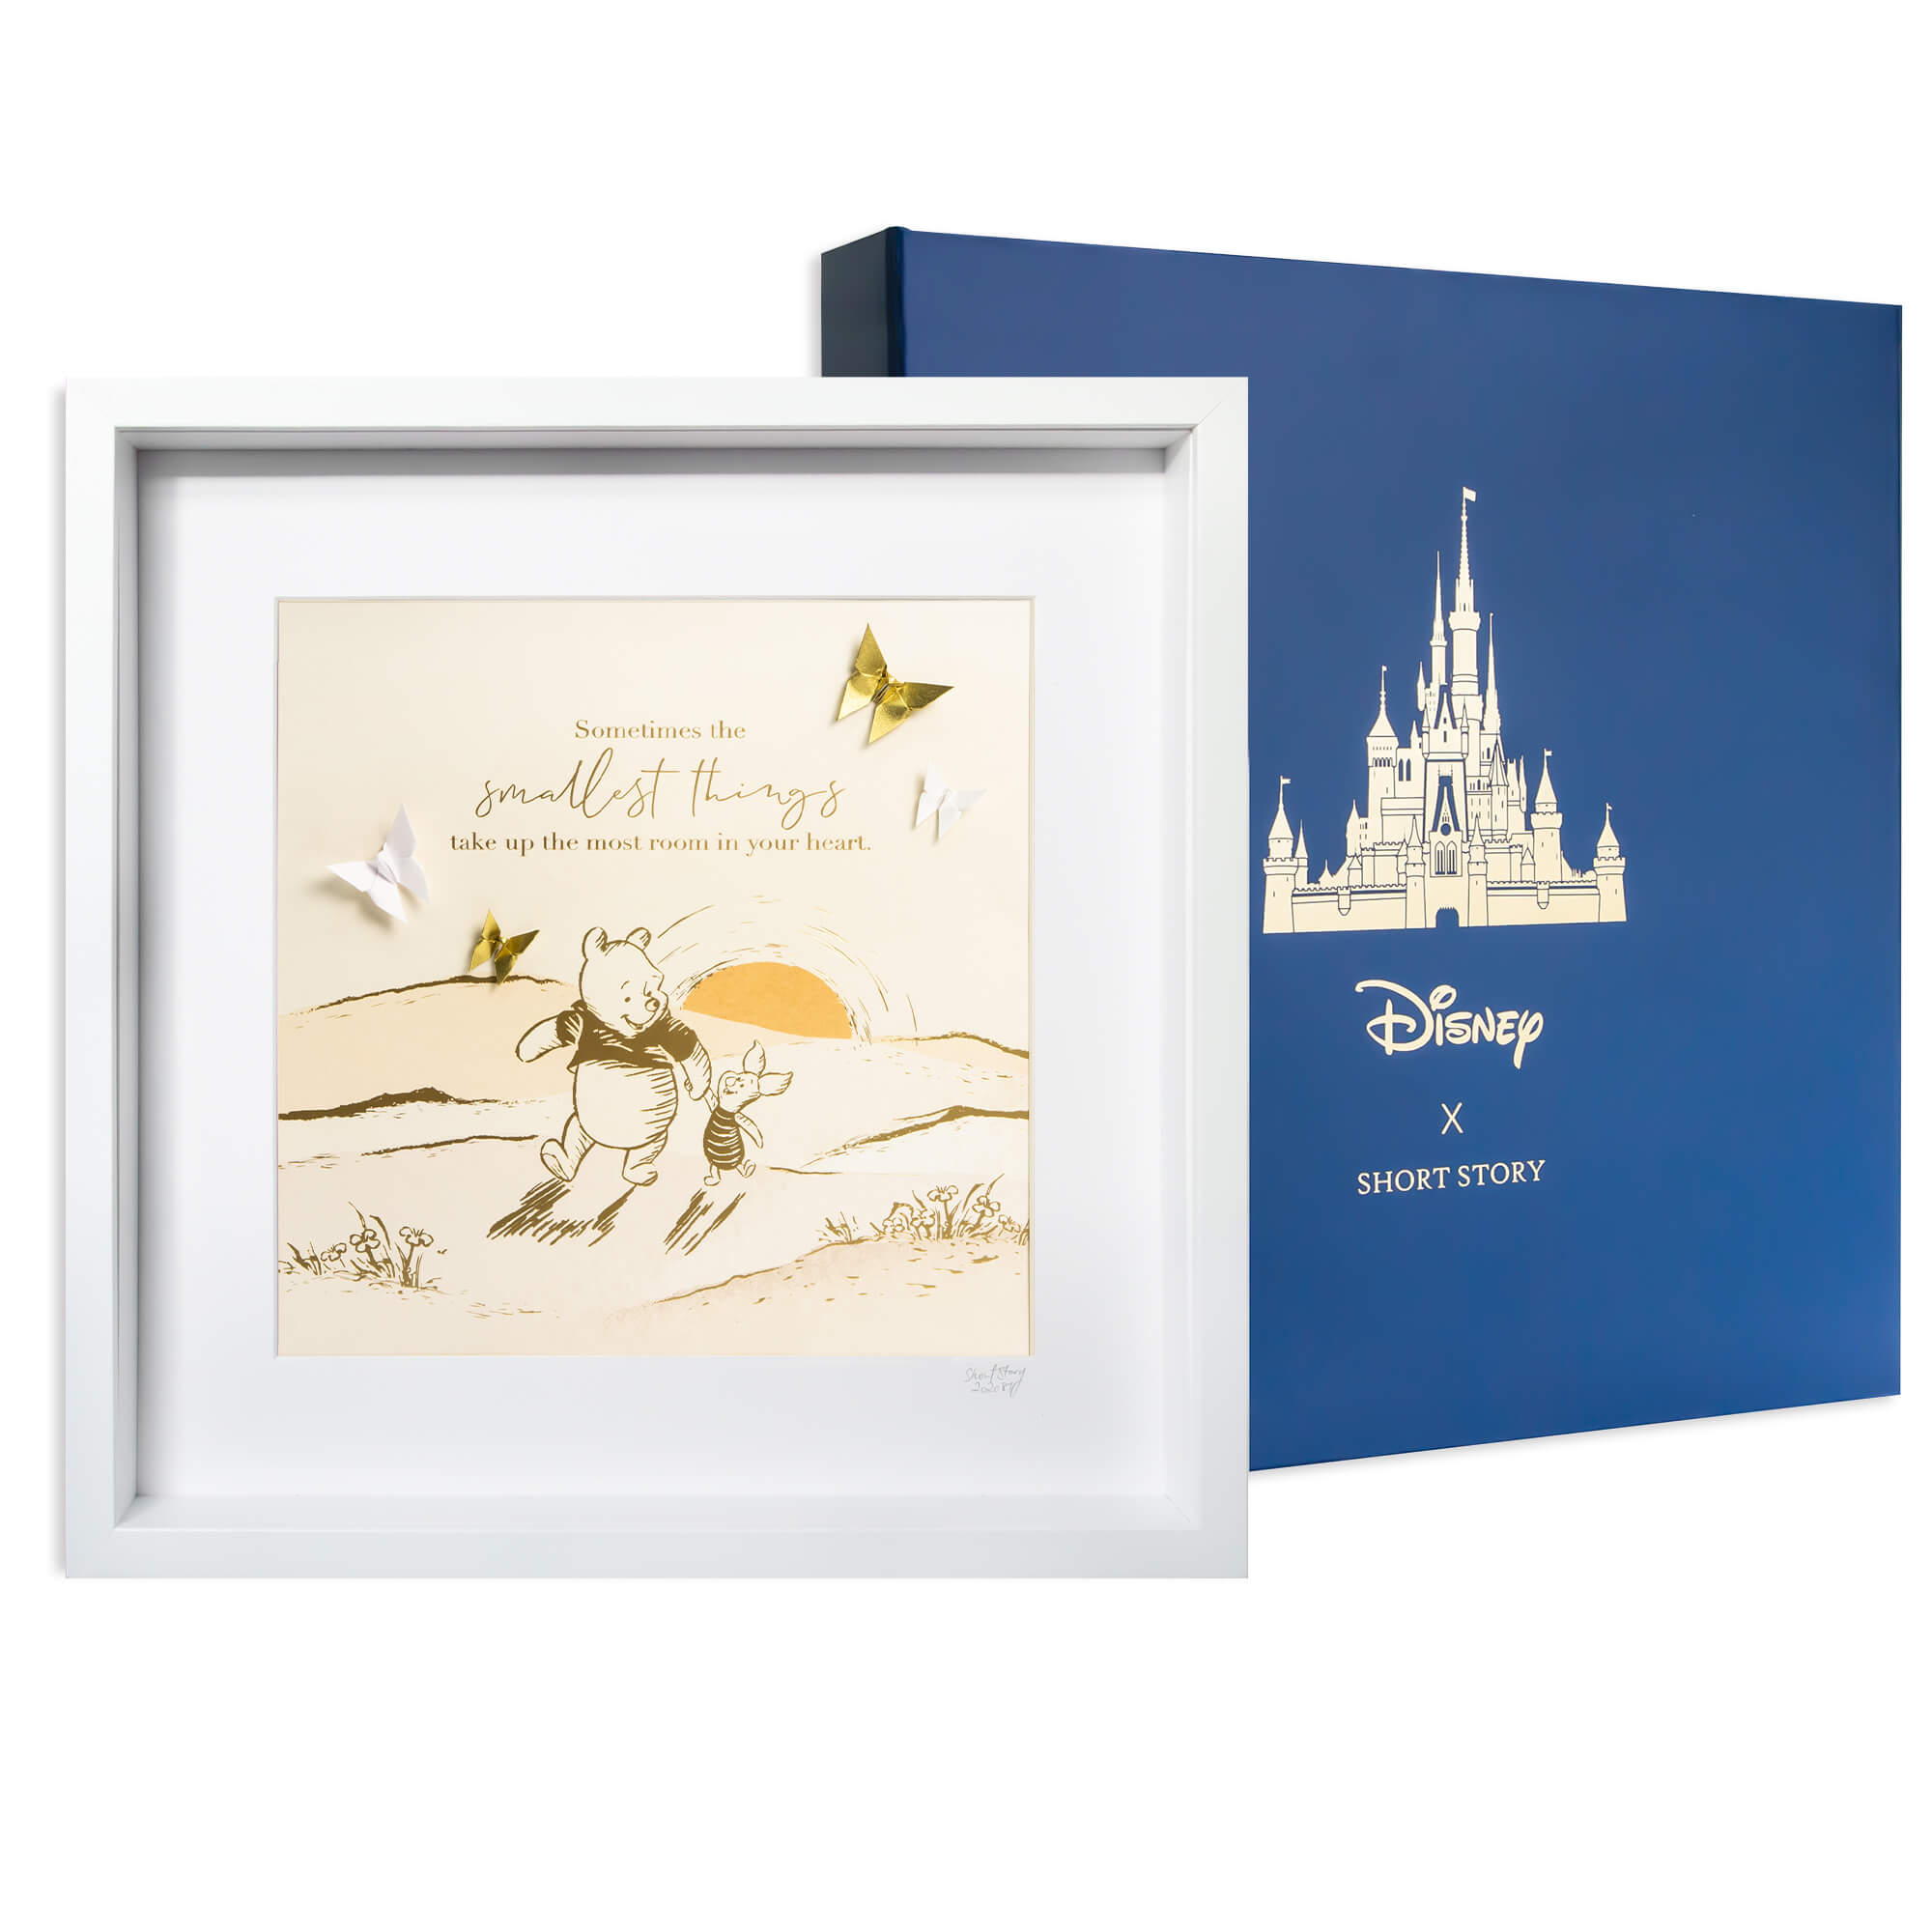 Disney Photo Frames & Albums: Magical Memories with Beloved Characters